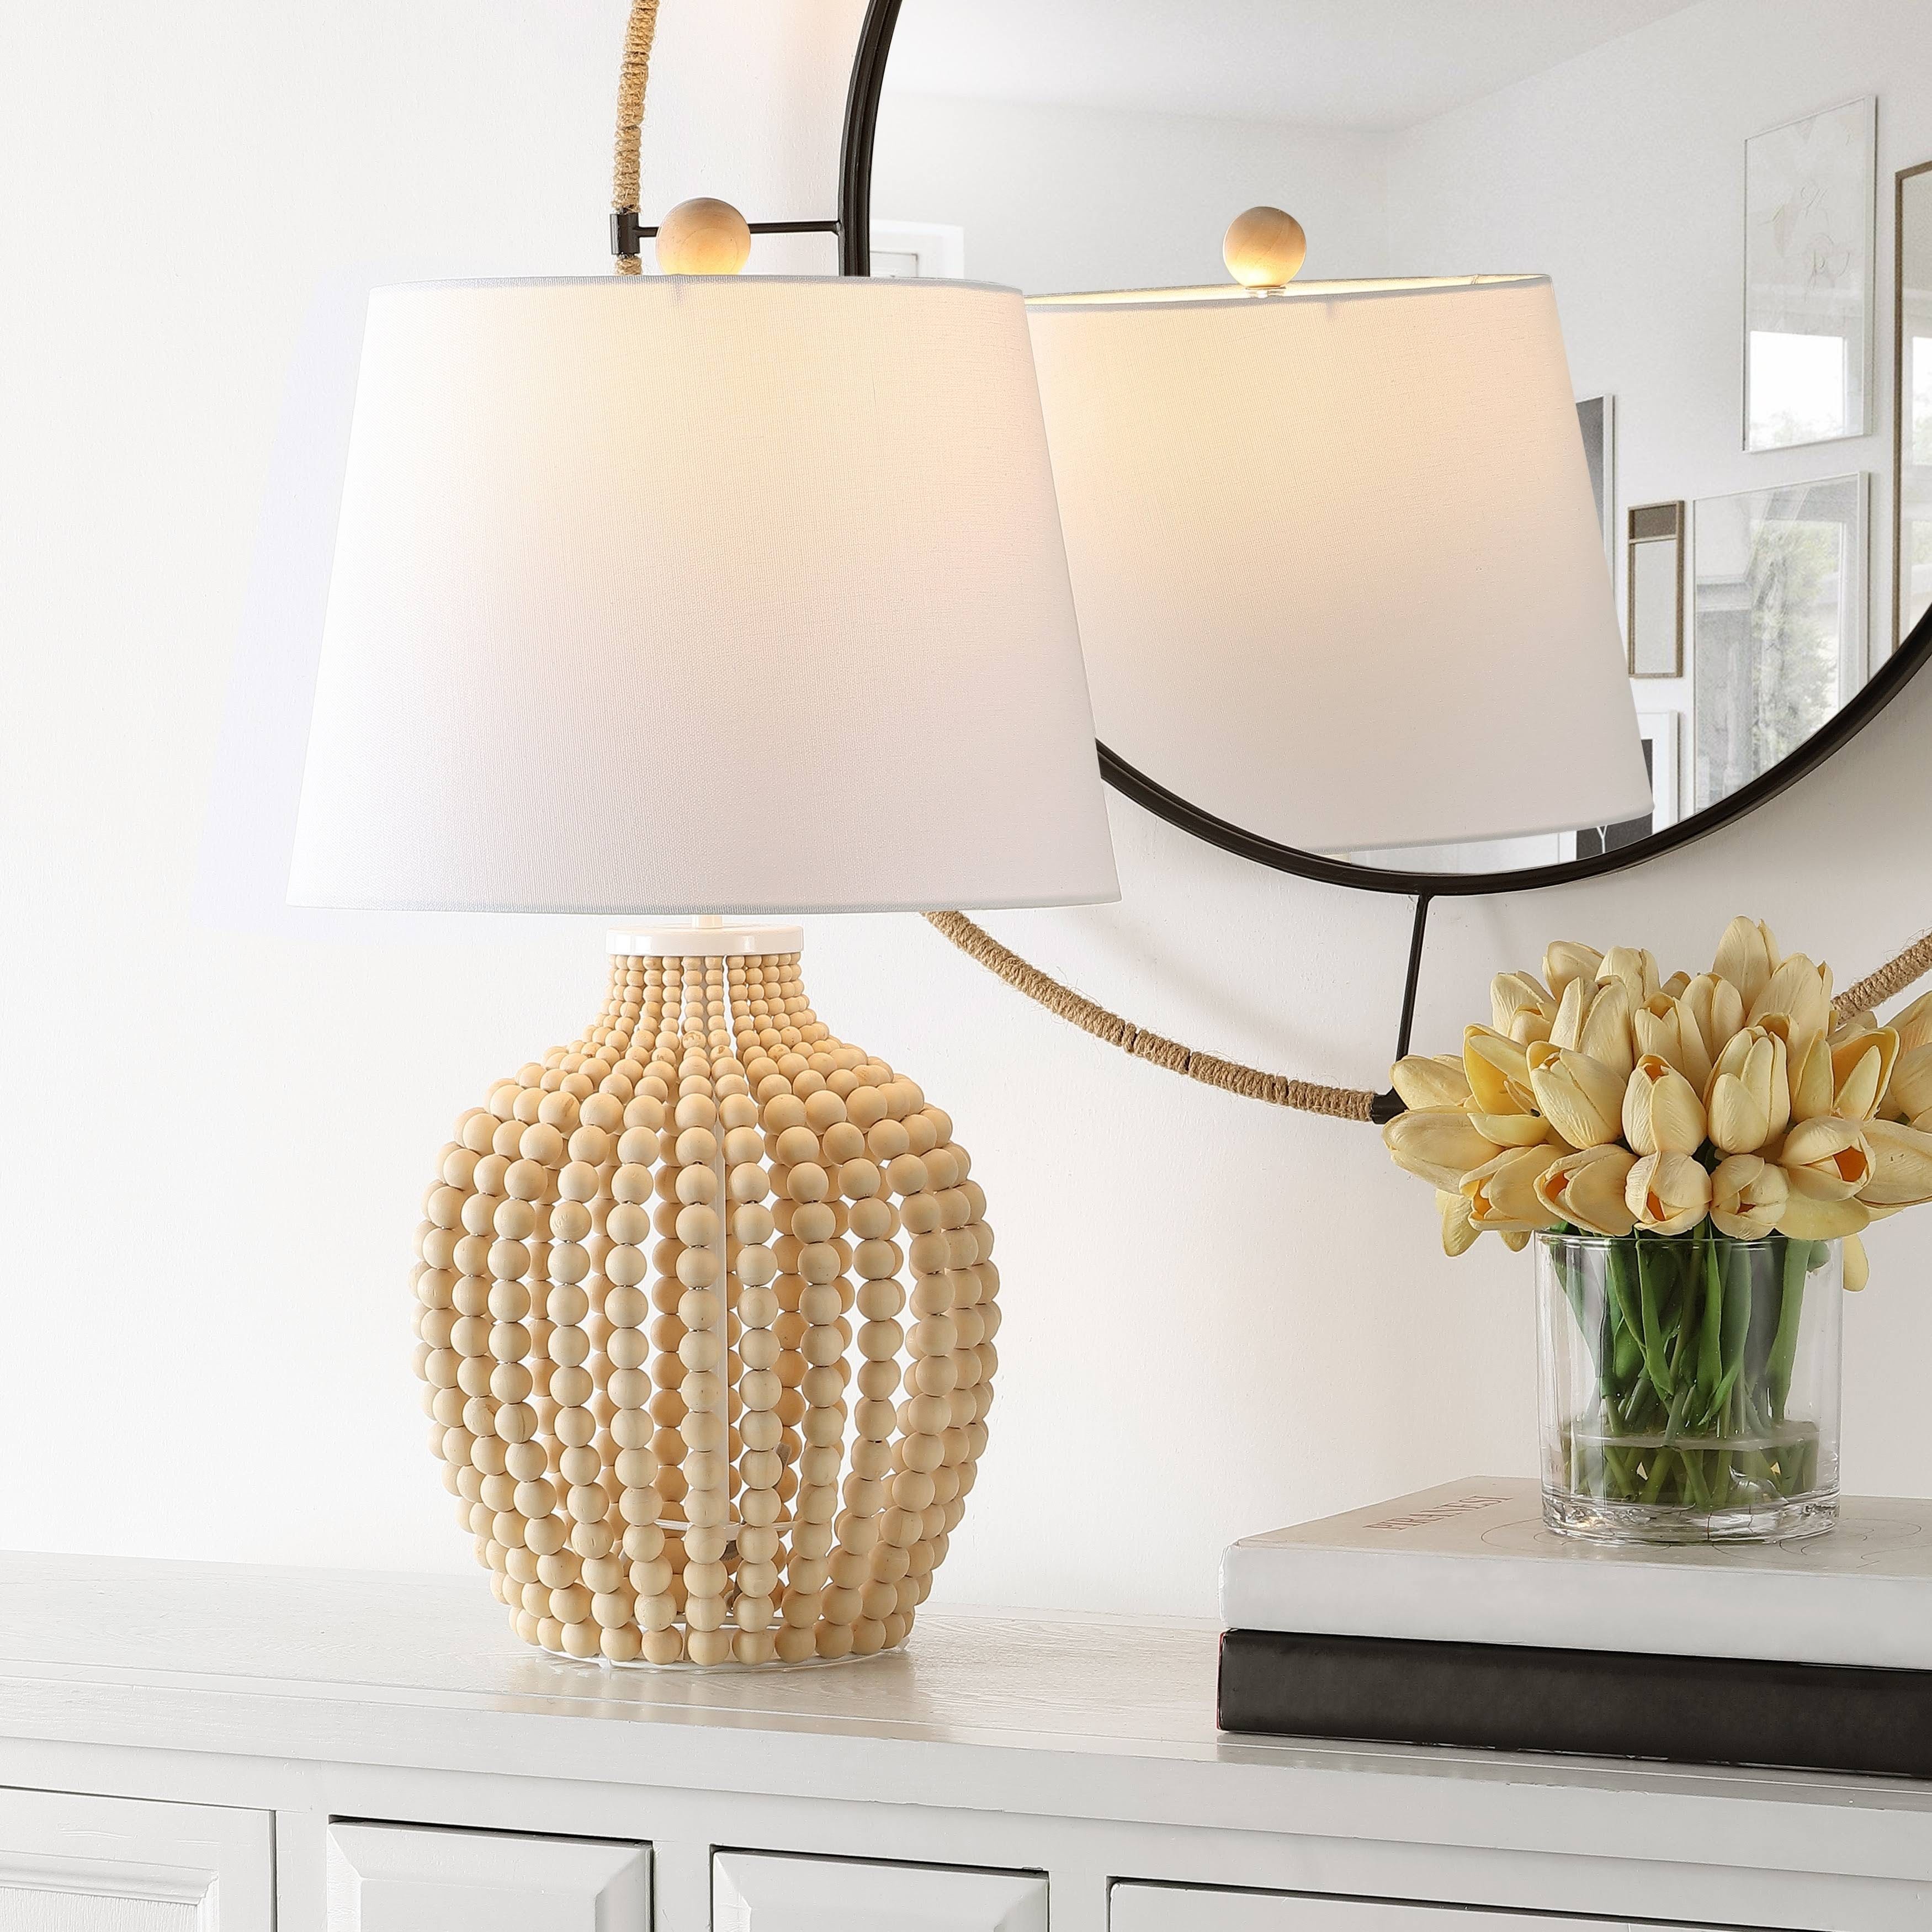 Eclectic Coastal Cool Decorative Wood Bead Table Lamp | Image